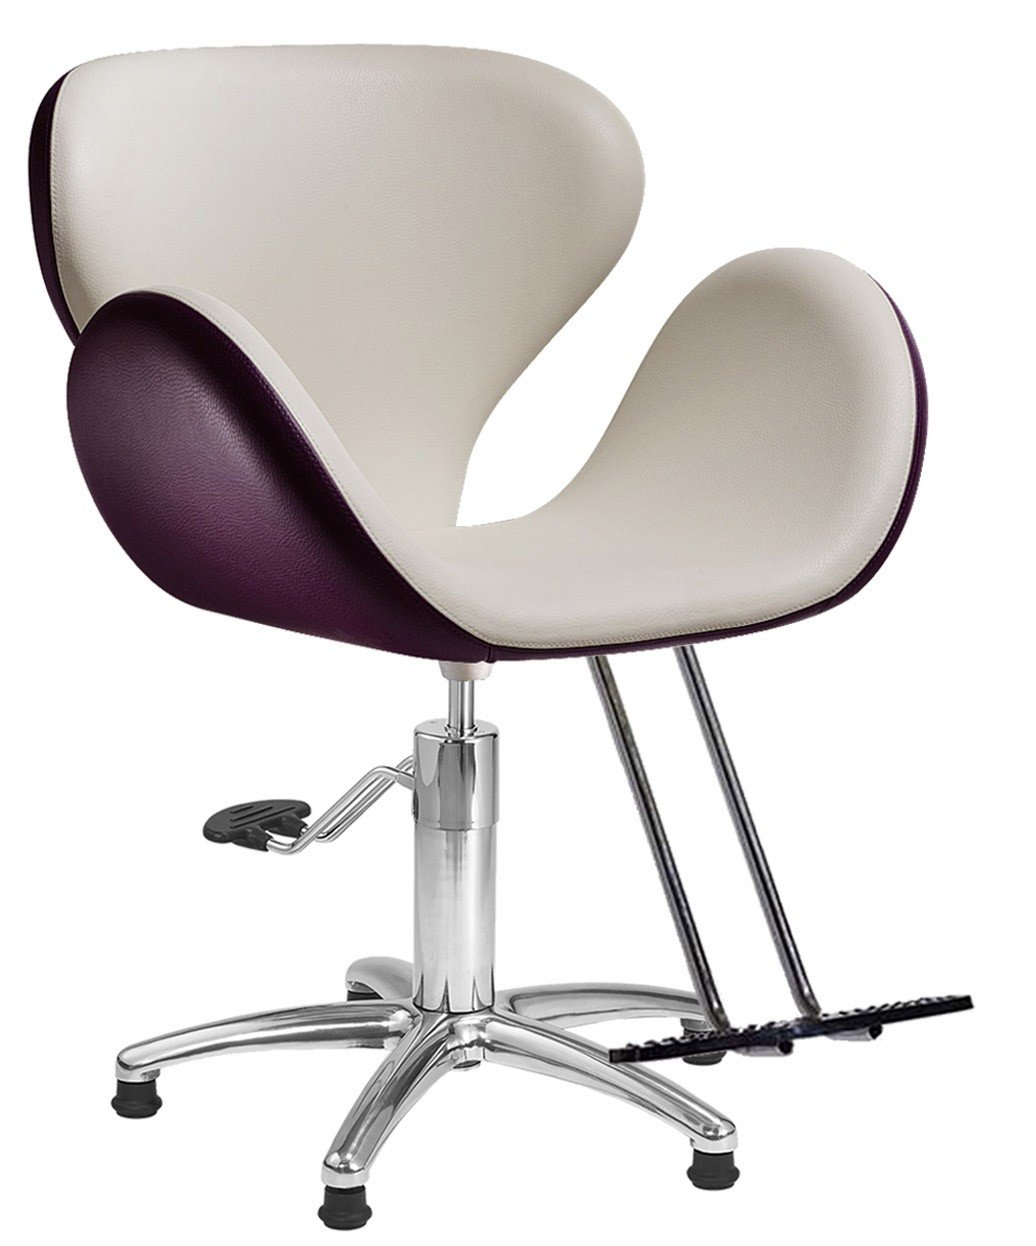 Salon Ambience SH-300 Tulip Styling Chair